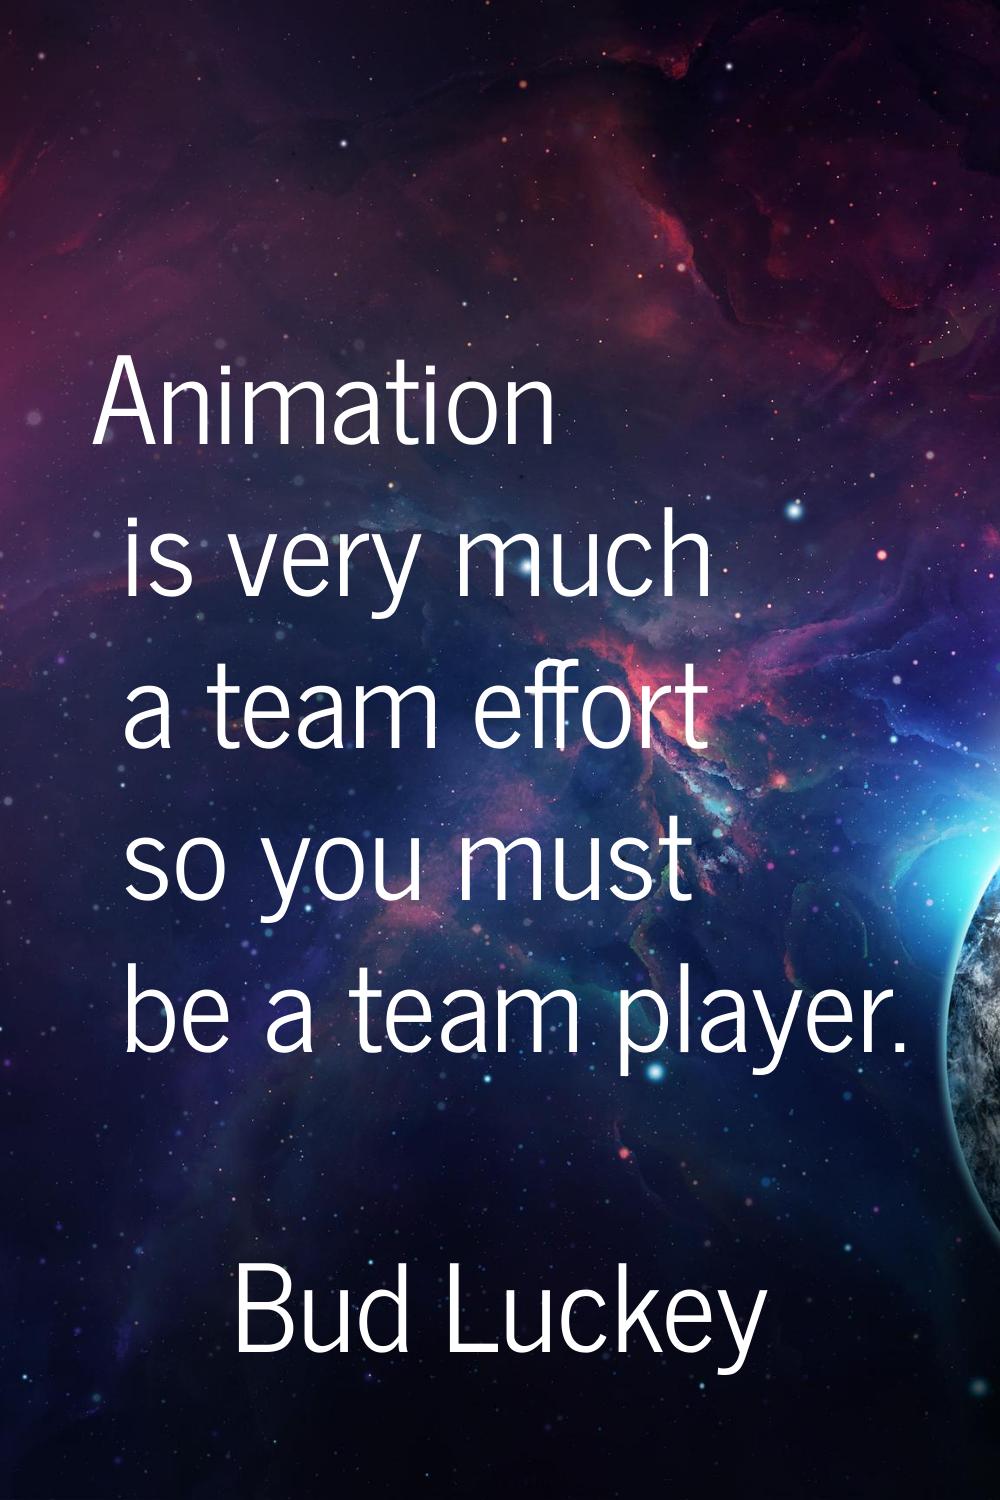 Animation is very much a team effort so you must be a team player.